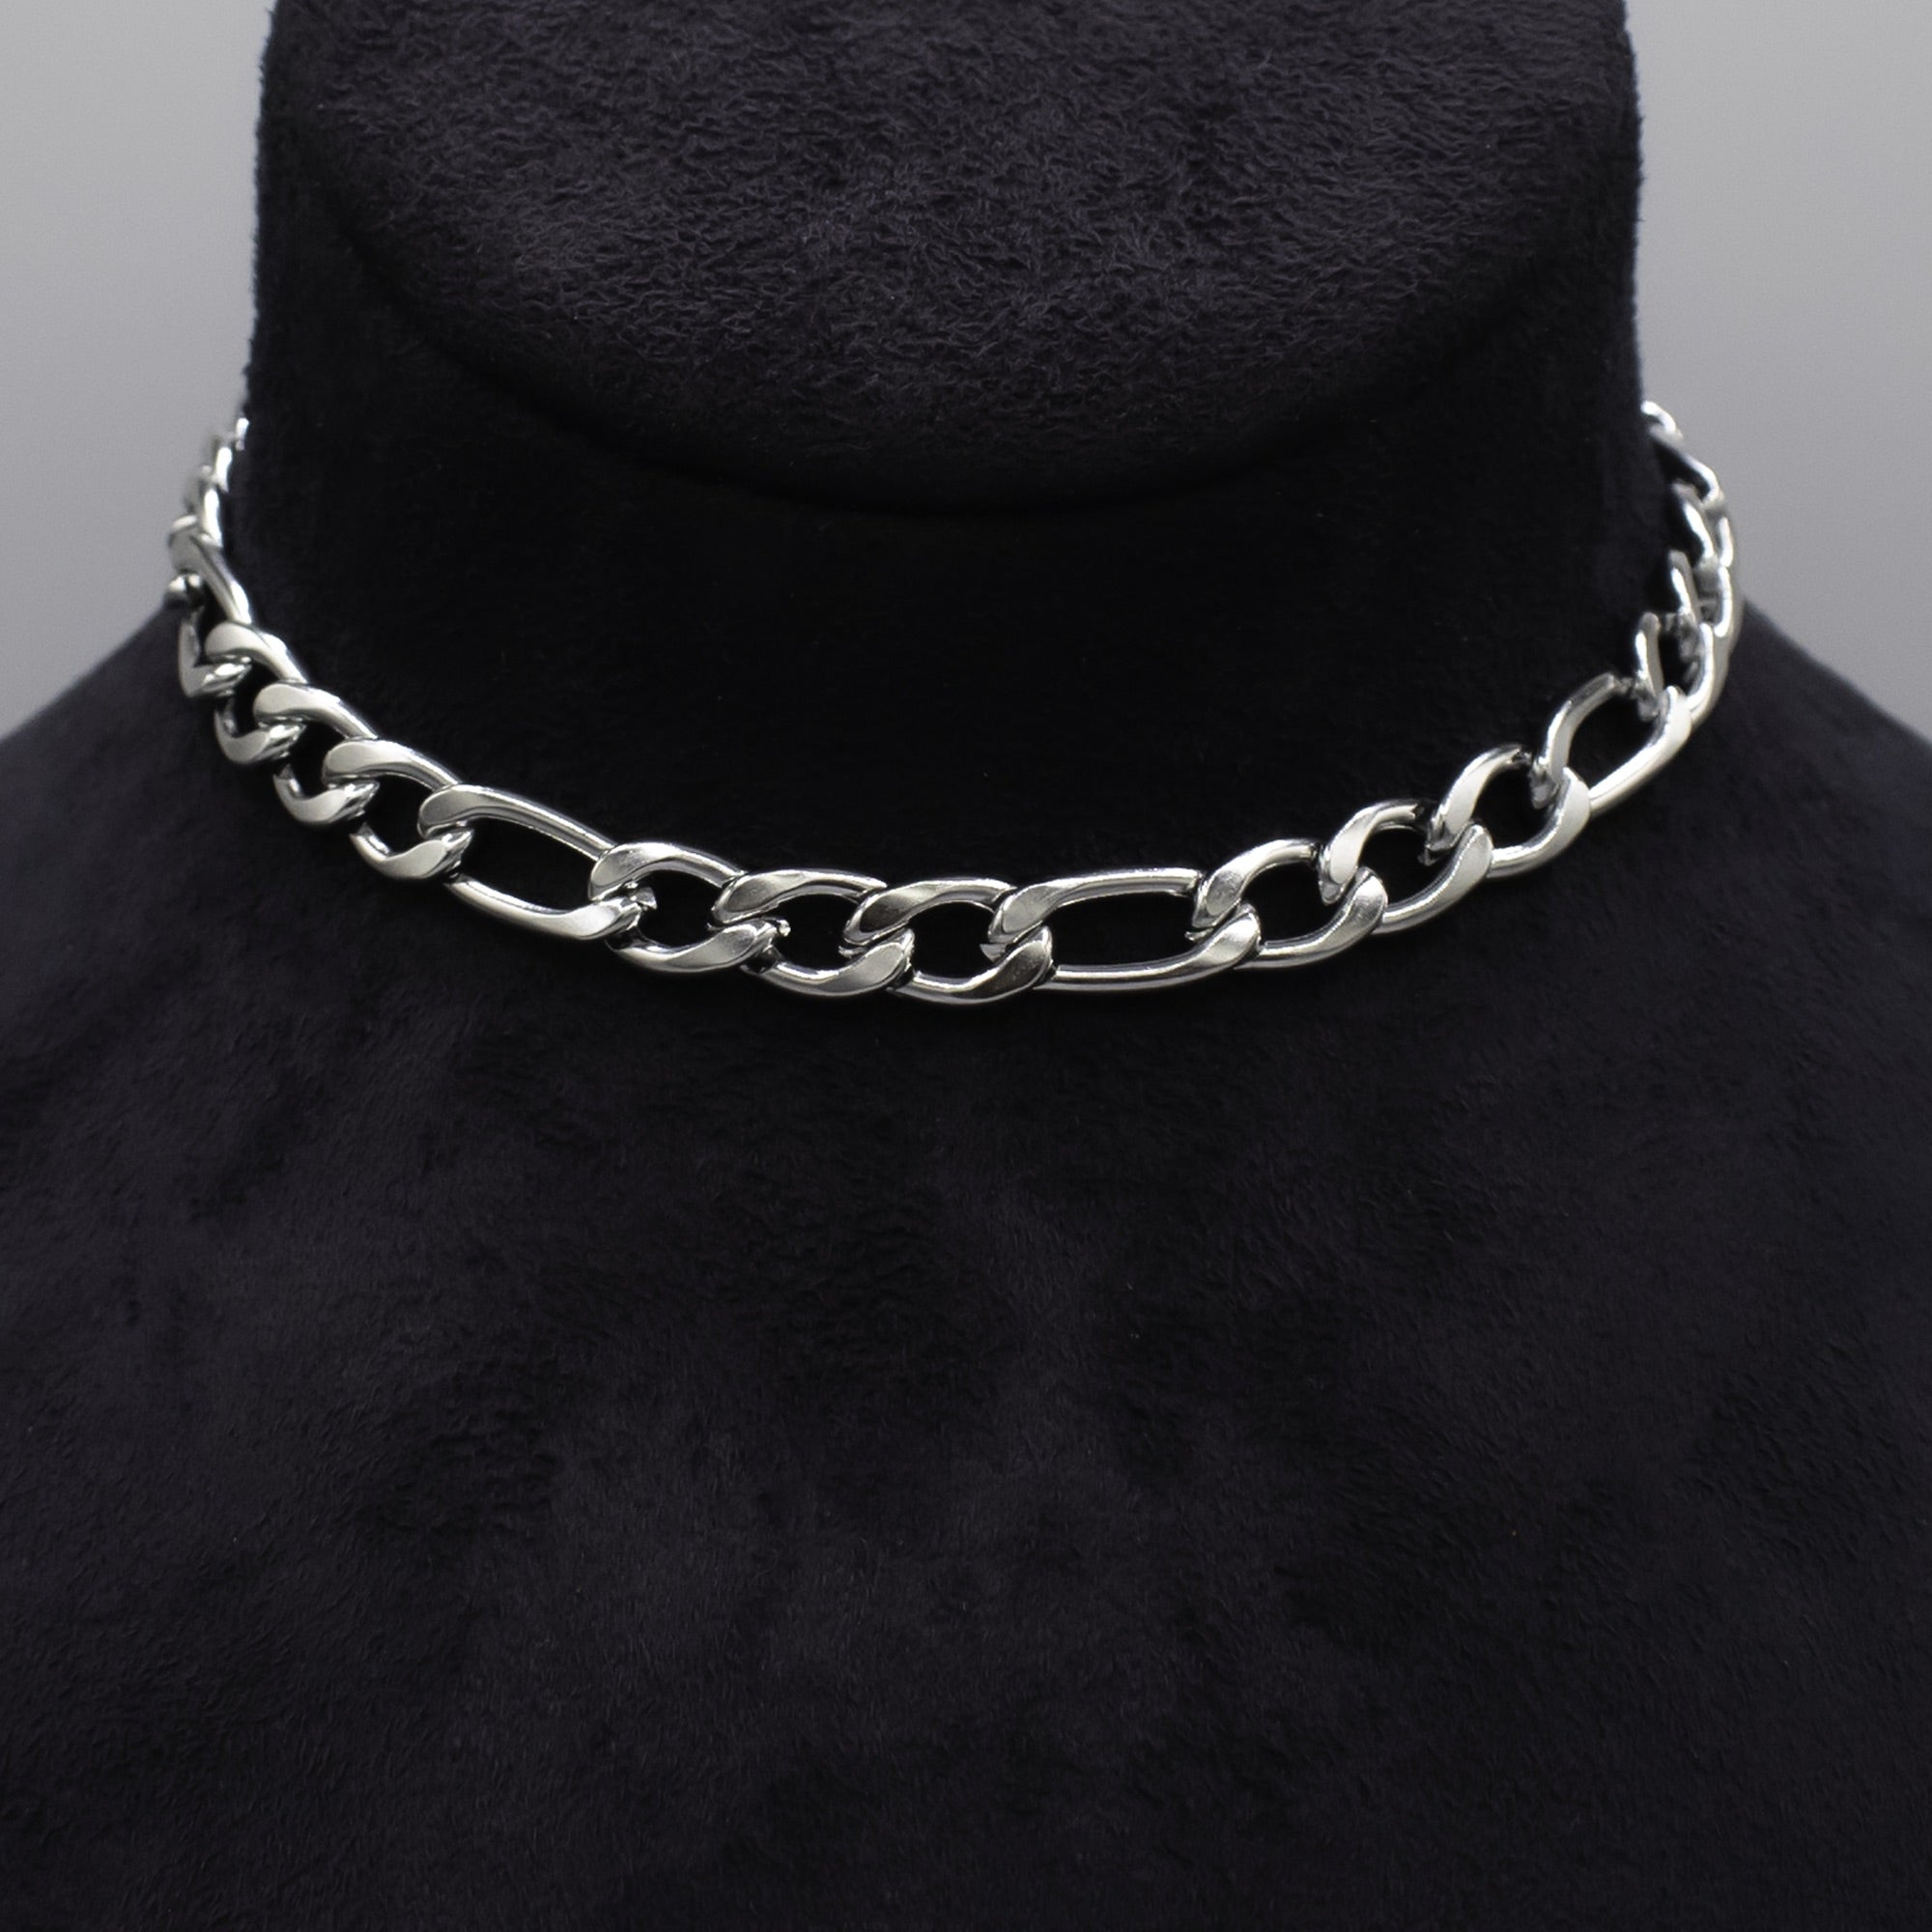 10mm thick figaro choker necklace